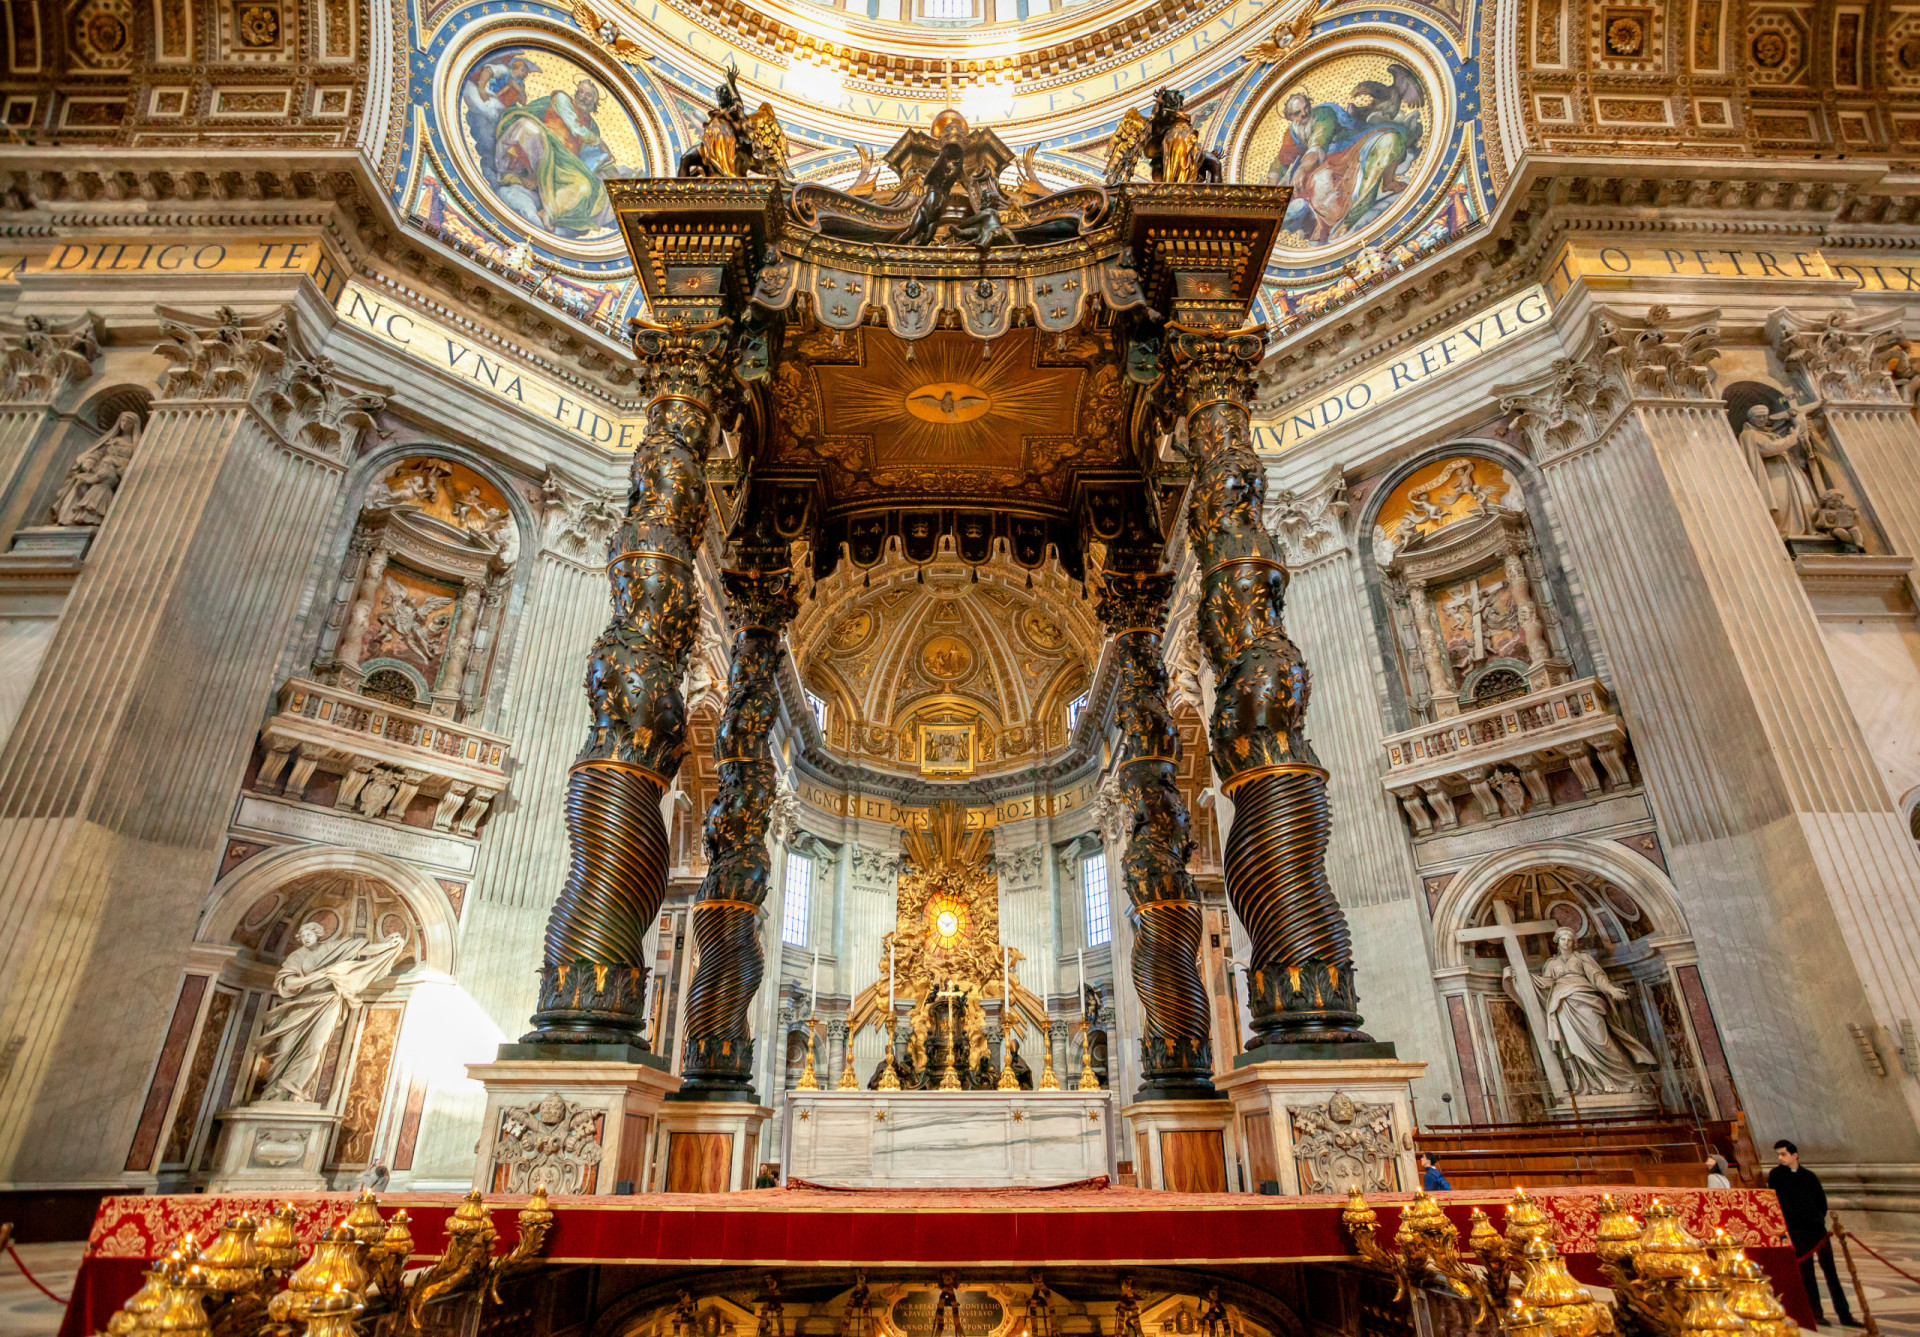 The most dazzling altars in the world